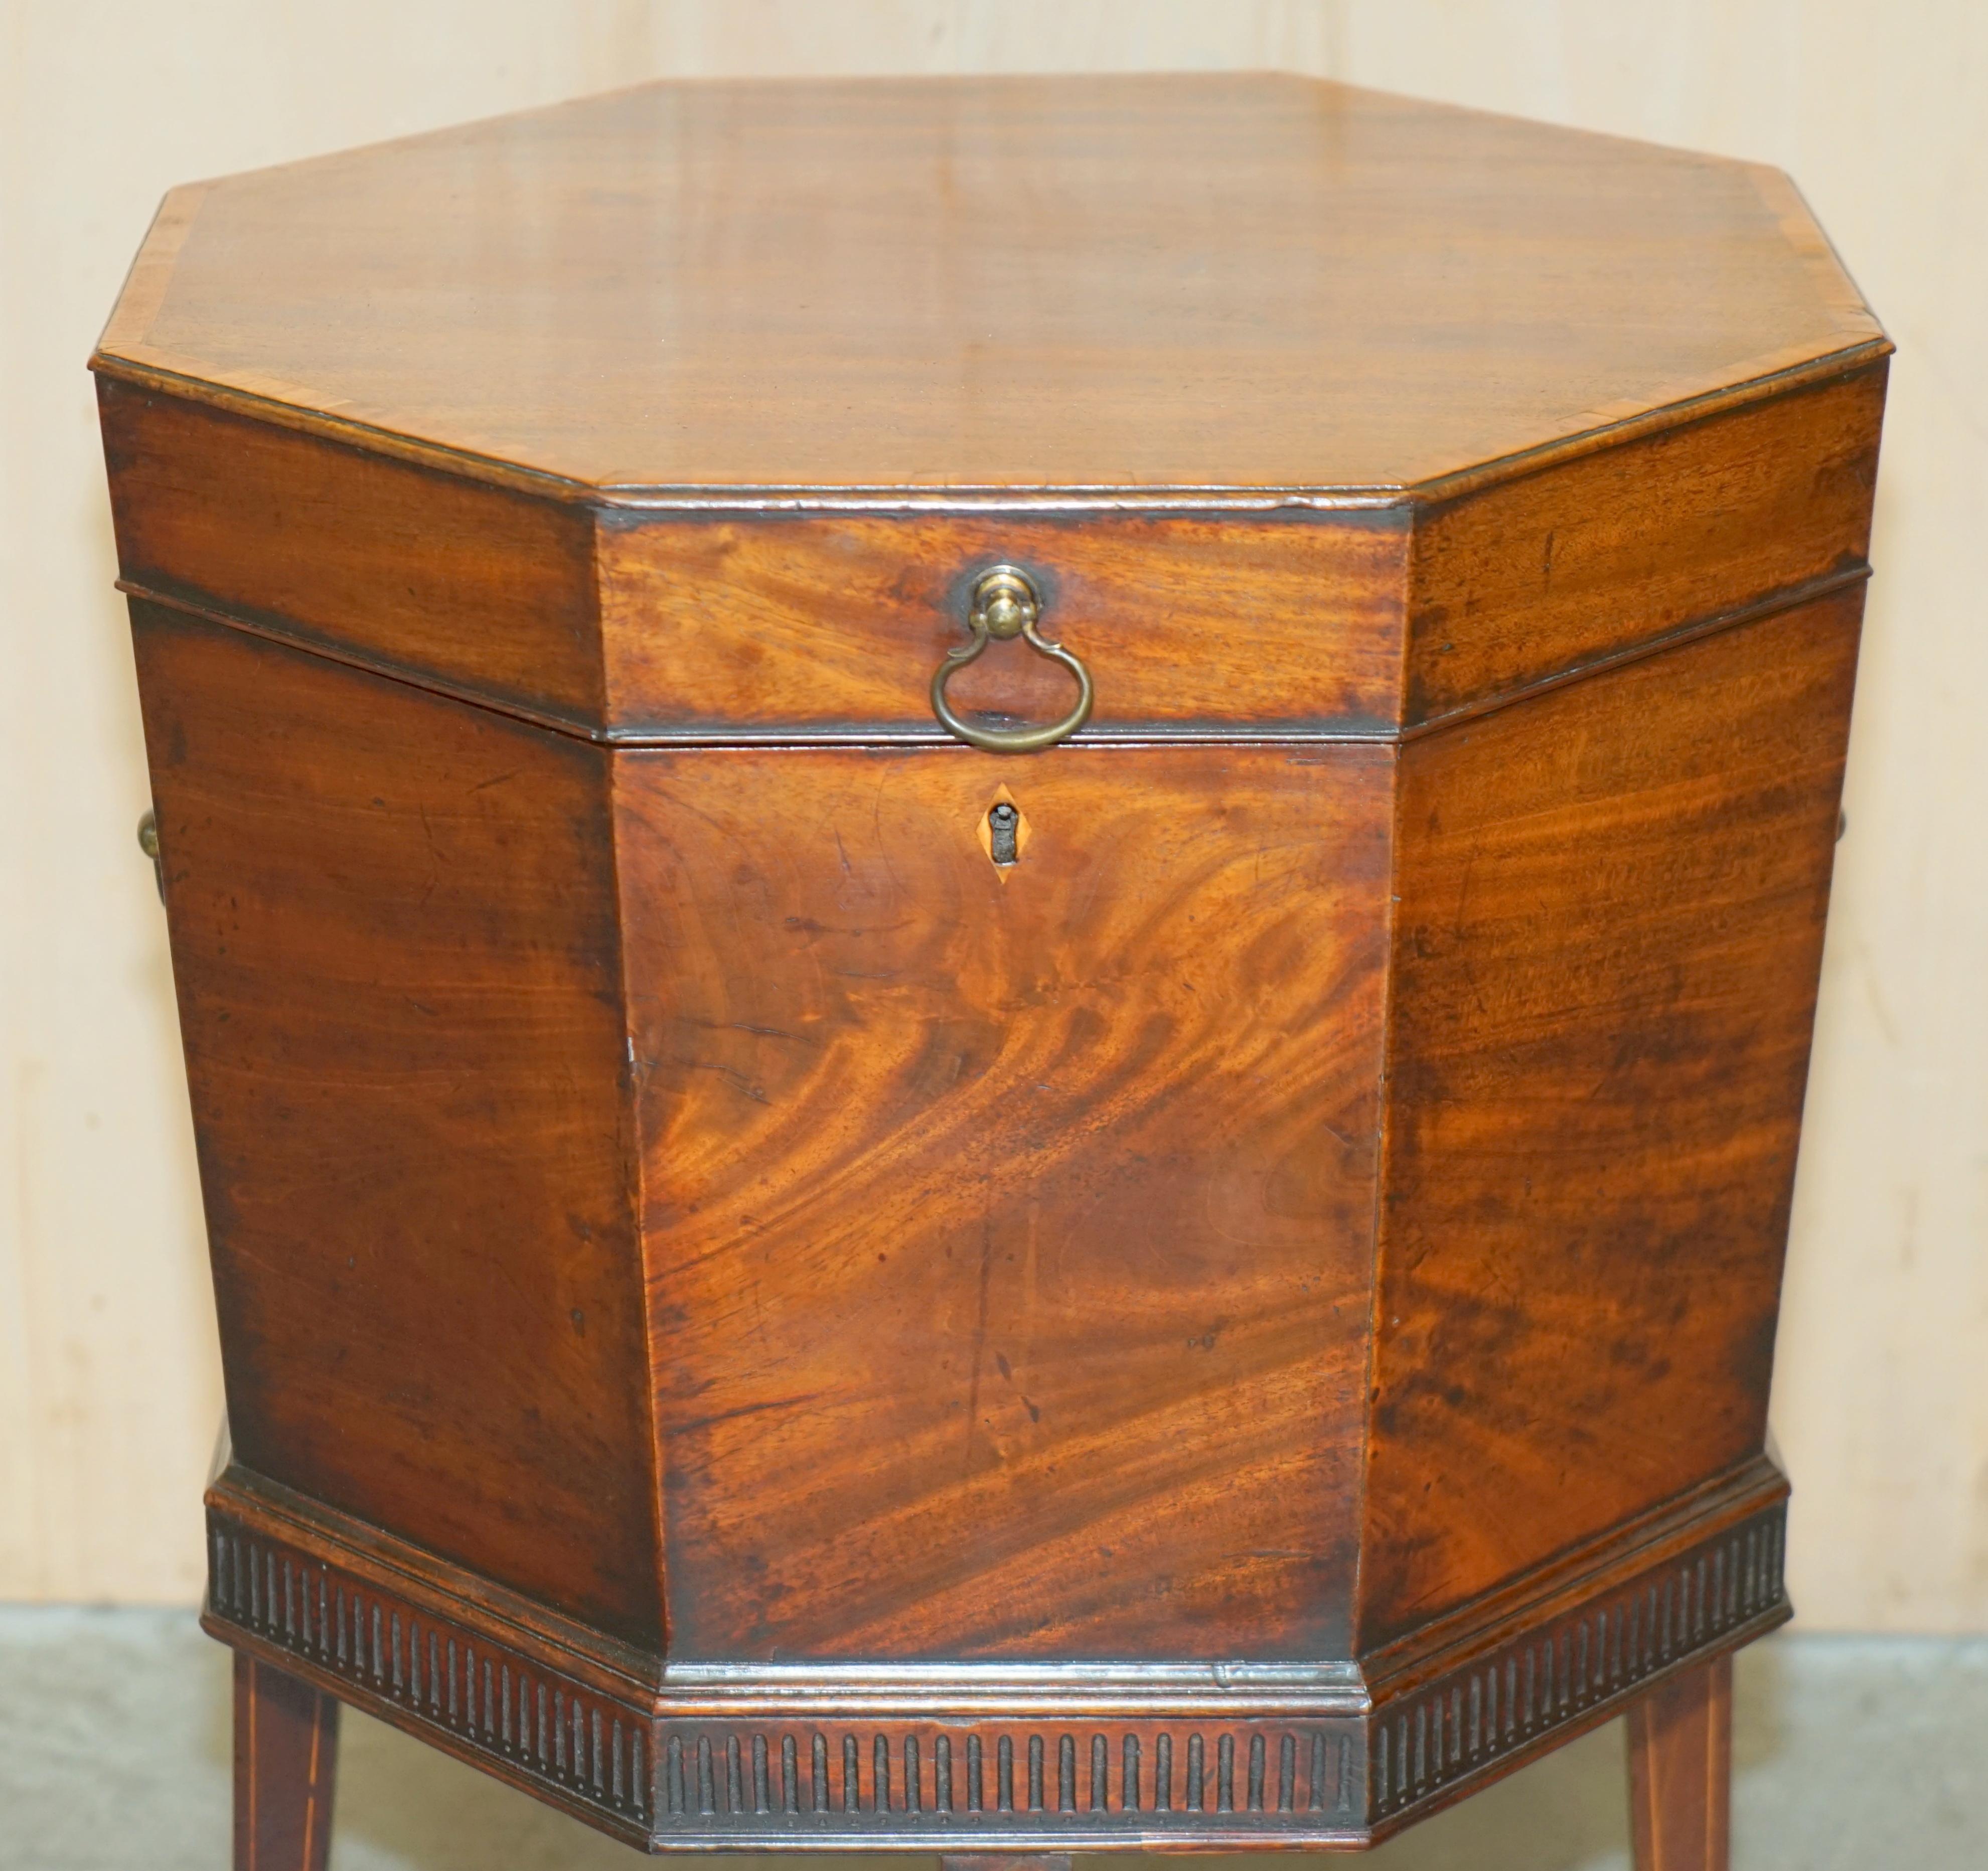 Hand-Crafted Very Rare Antique Fully Restored George III 1780 Hardwood Wine Cooler Cellarette For Sale